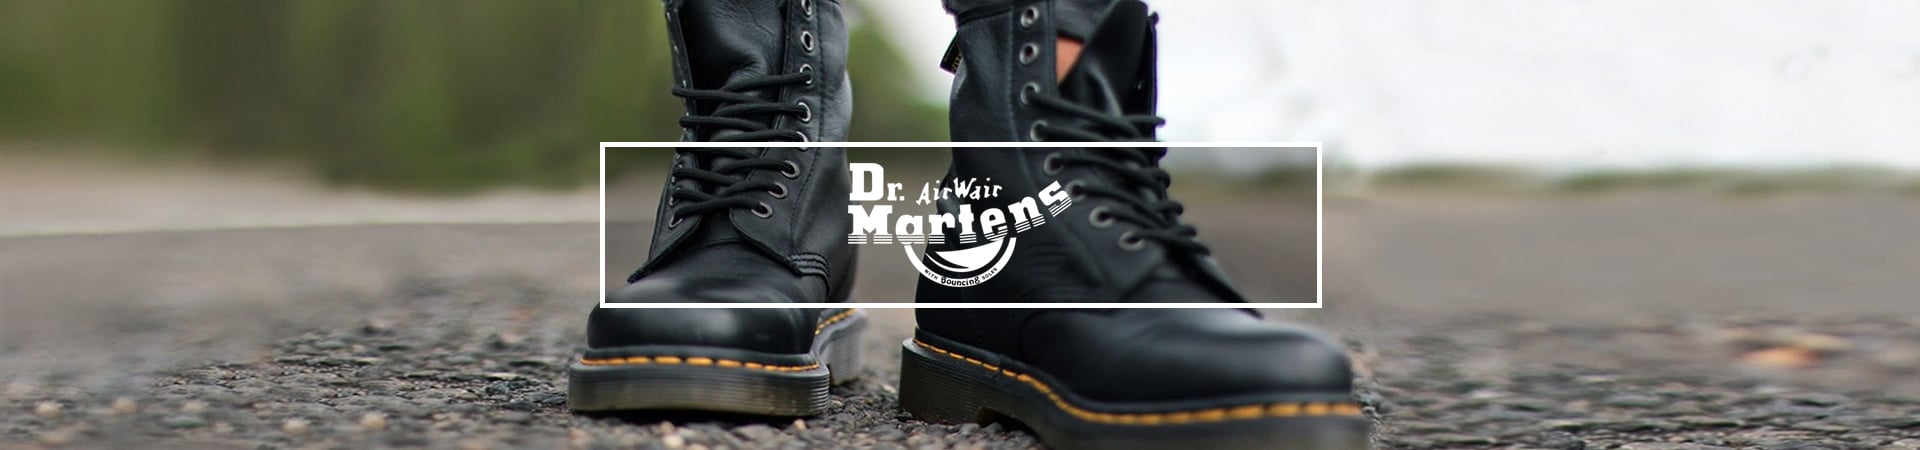 doc marten pull on work boots